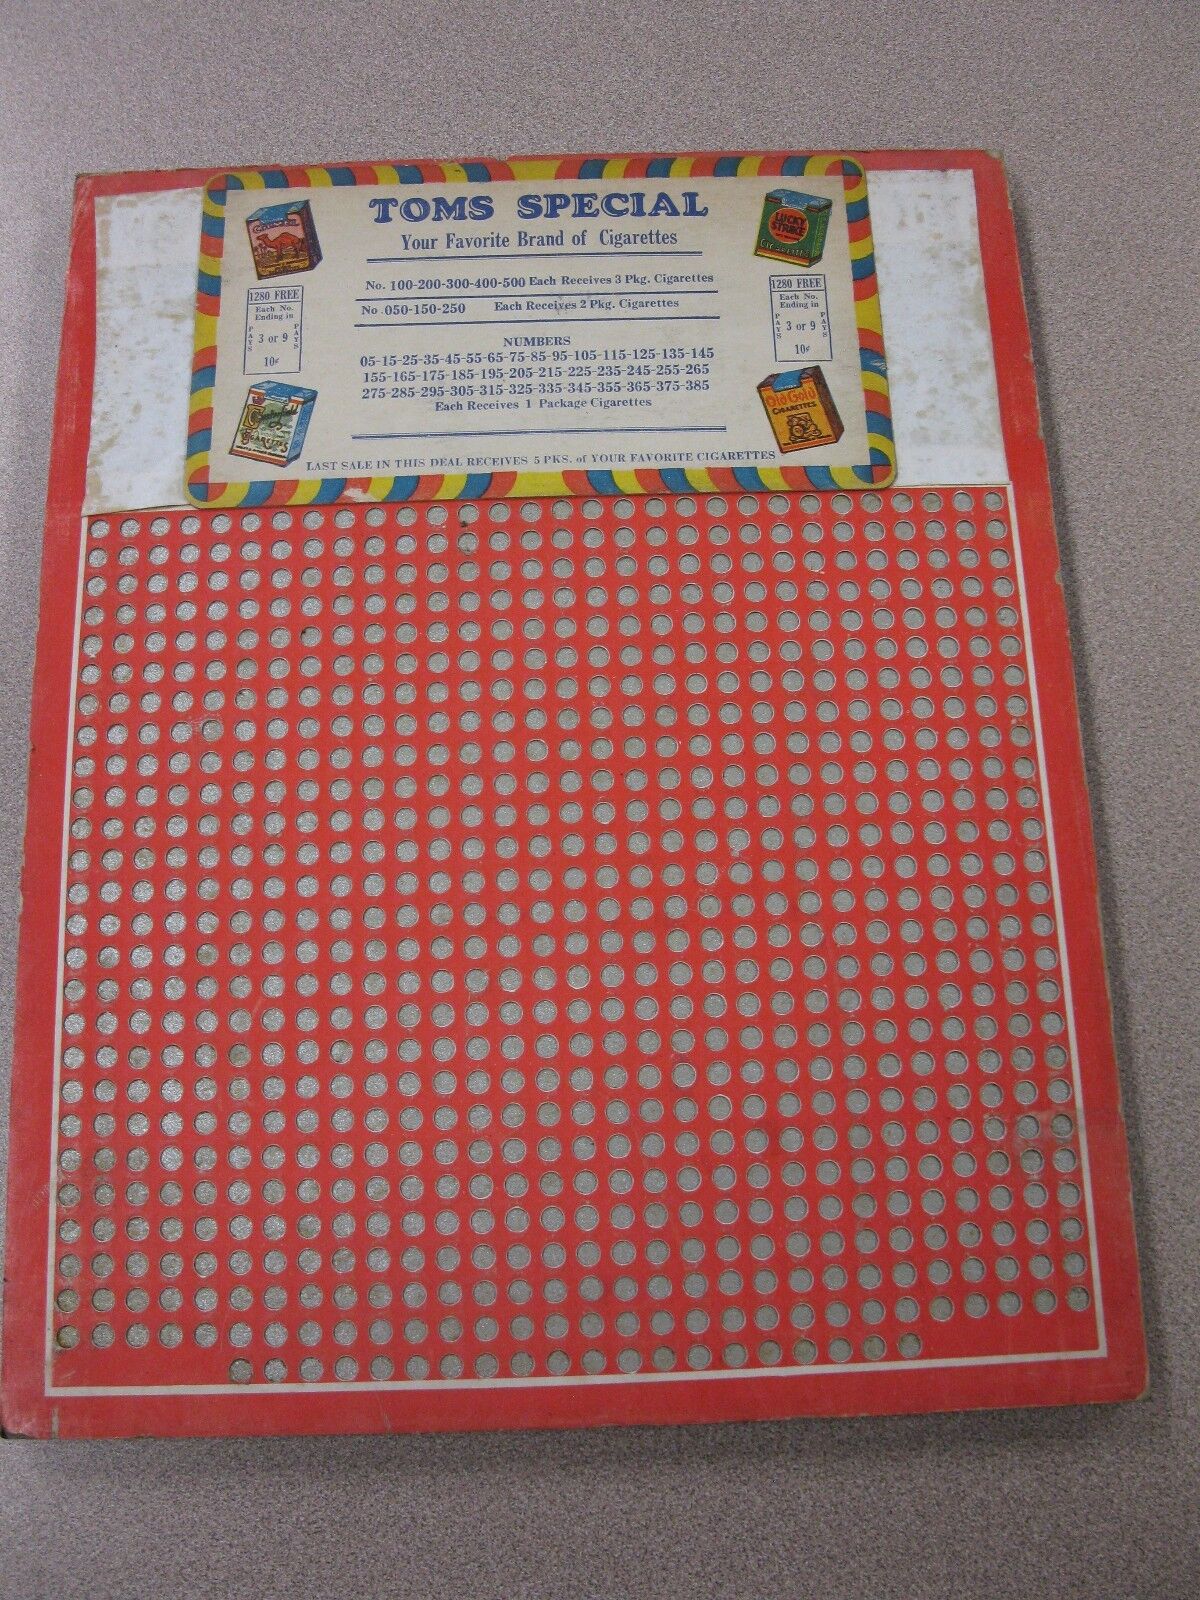 Vintage Punch Board TOMS SPECIAL .10 Cigarette Gambling Device #4572 BOX#PB-16